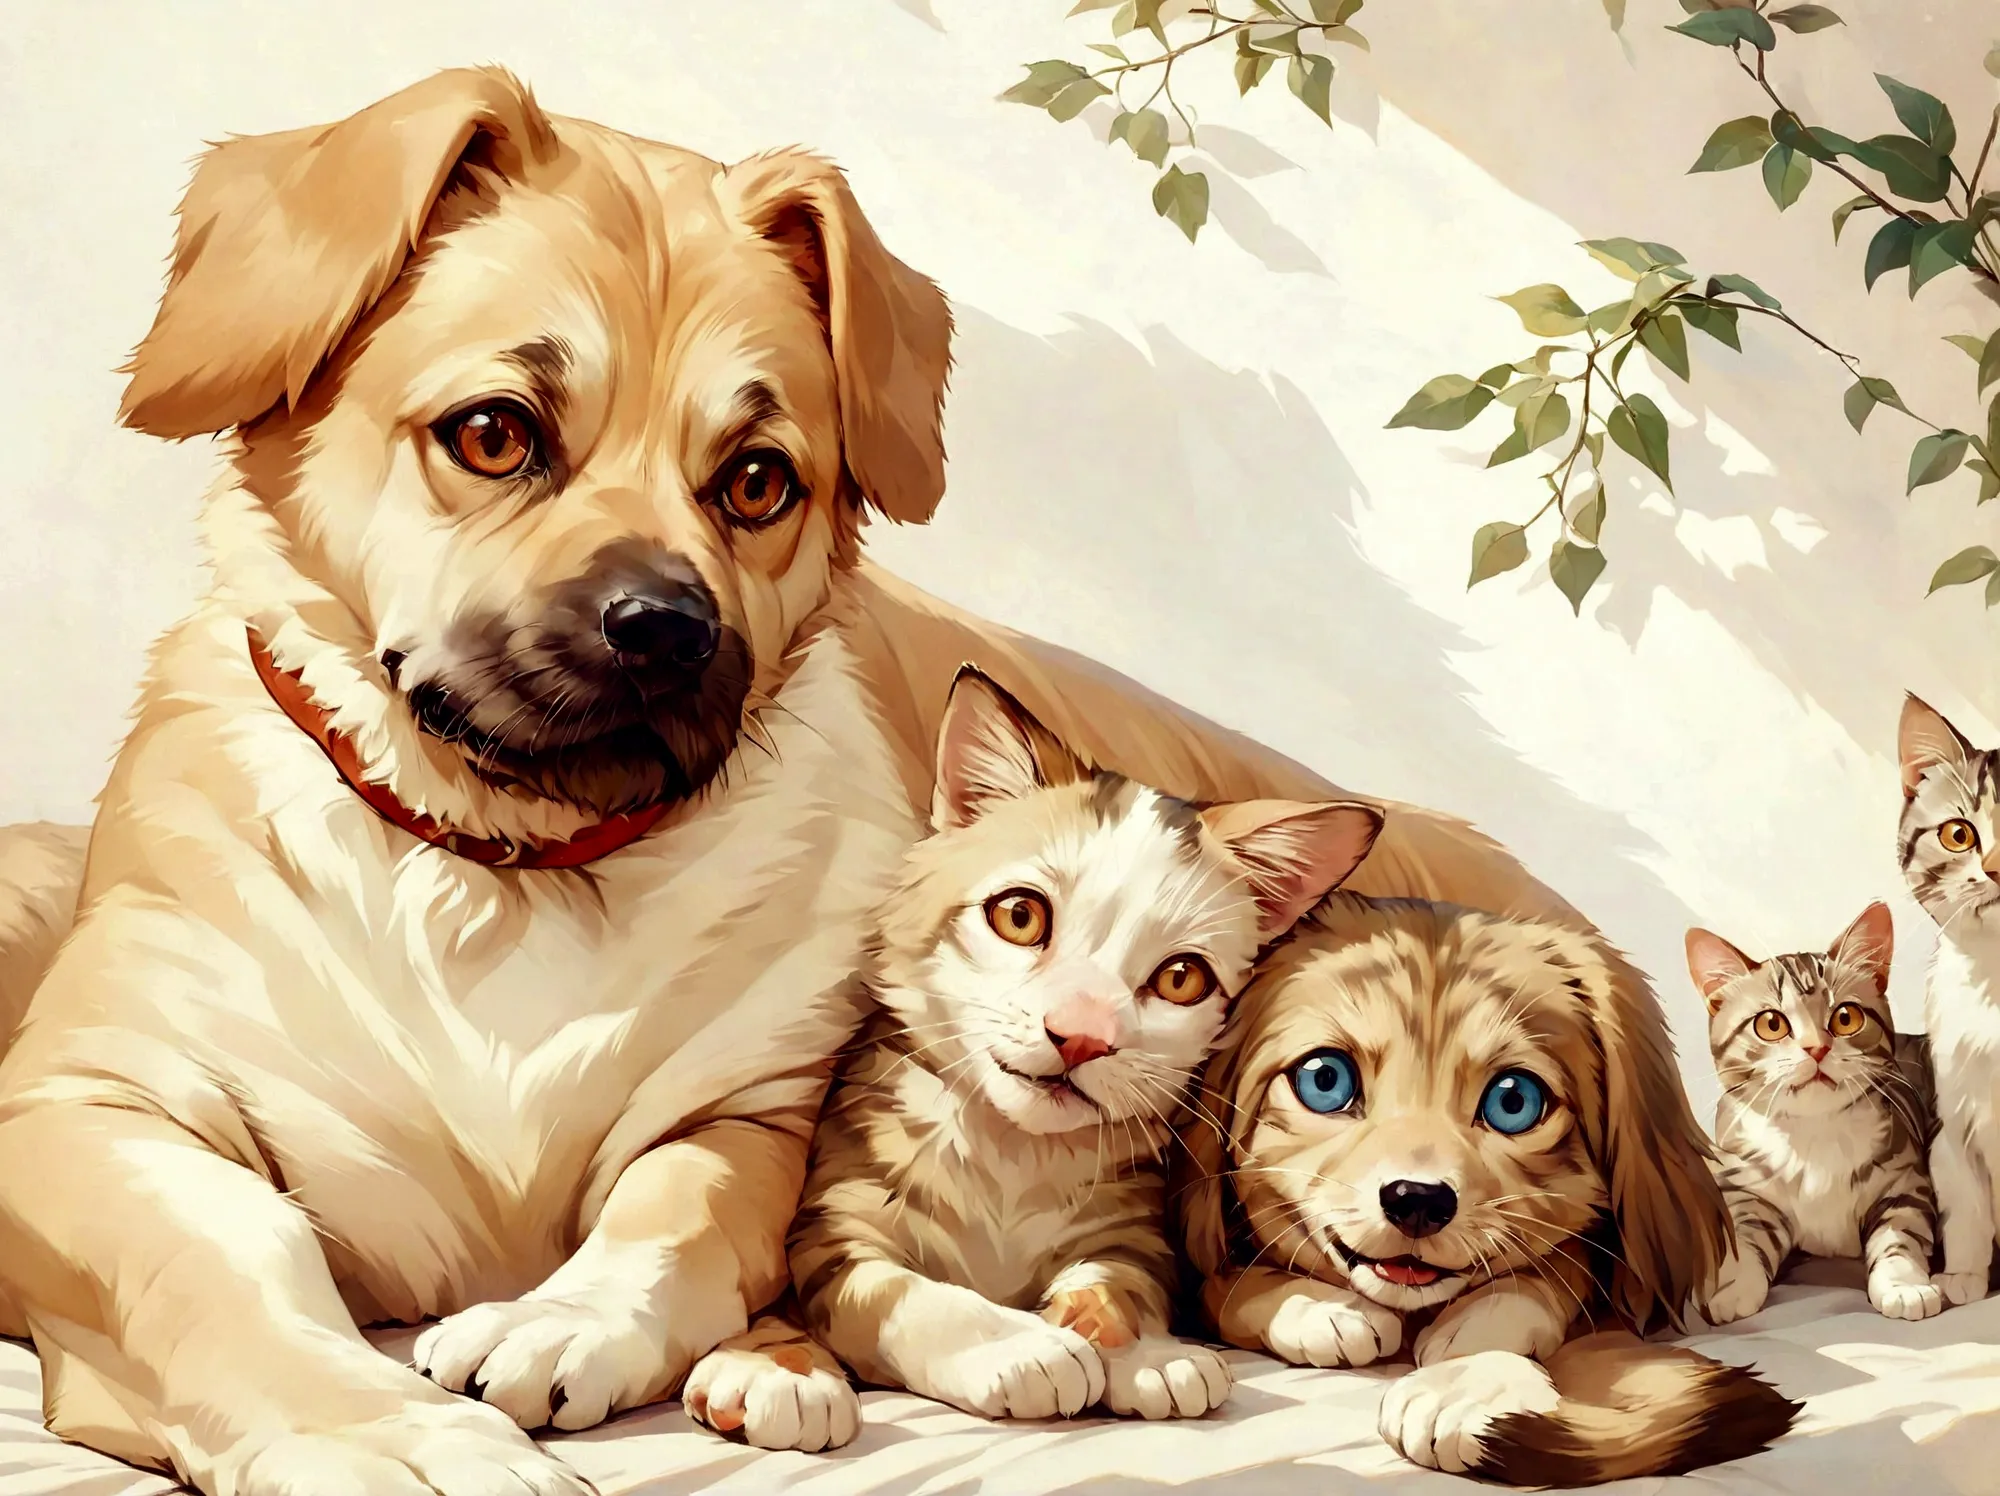 "A realistic painting of a dog and a cat in the exact same positions as in the provided photo. The dog is on the left, facing fo...